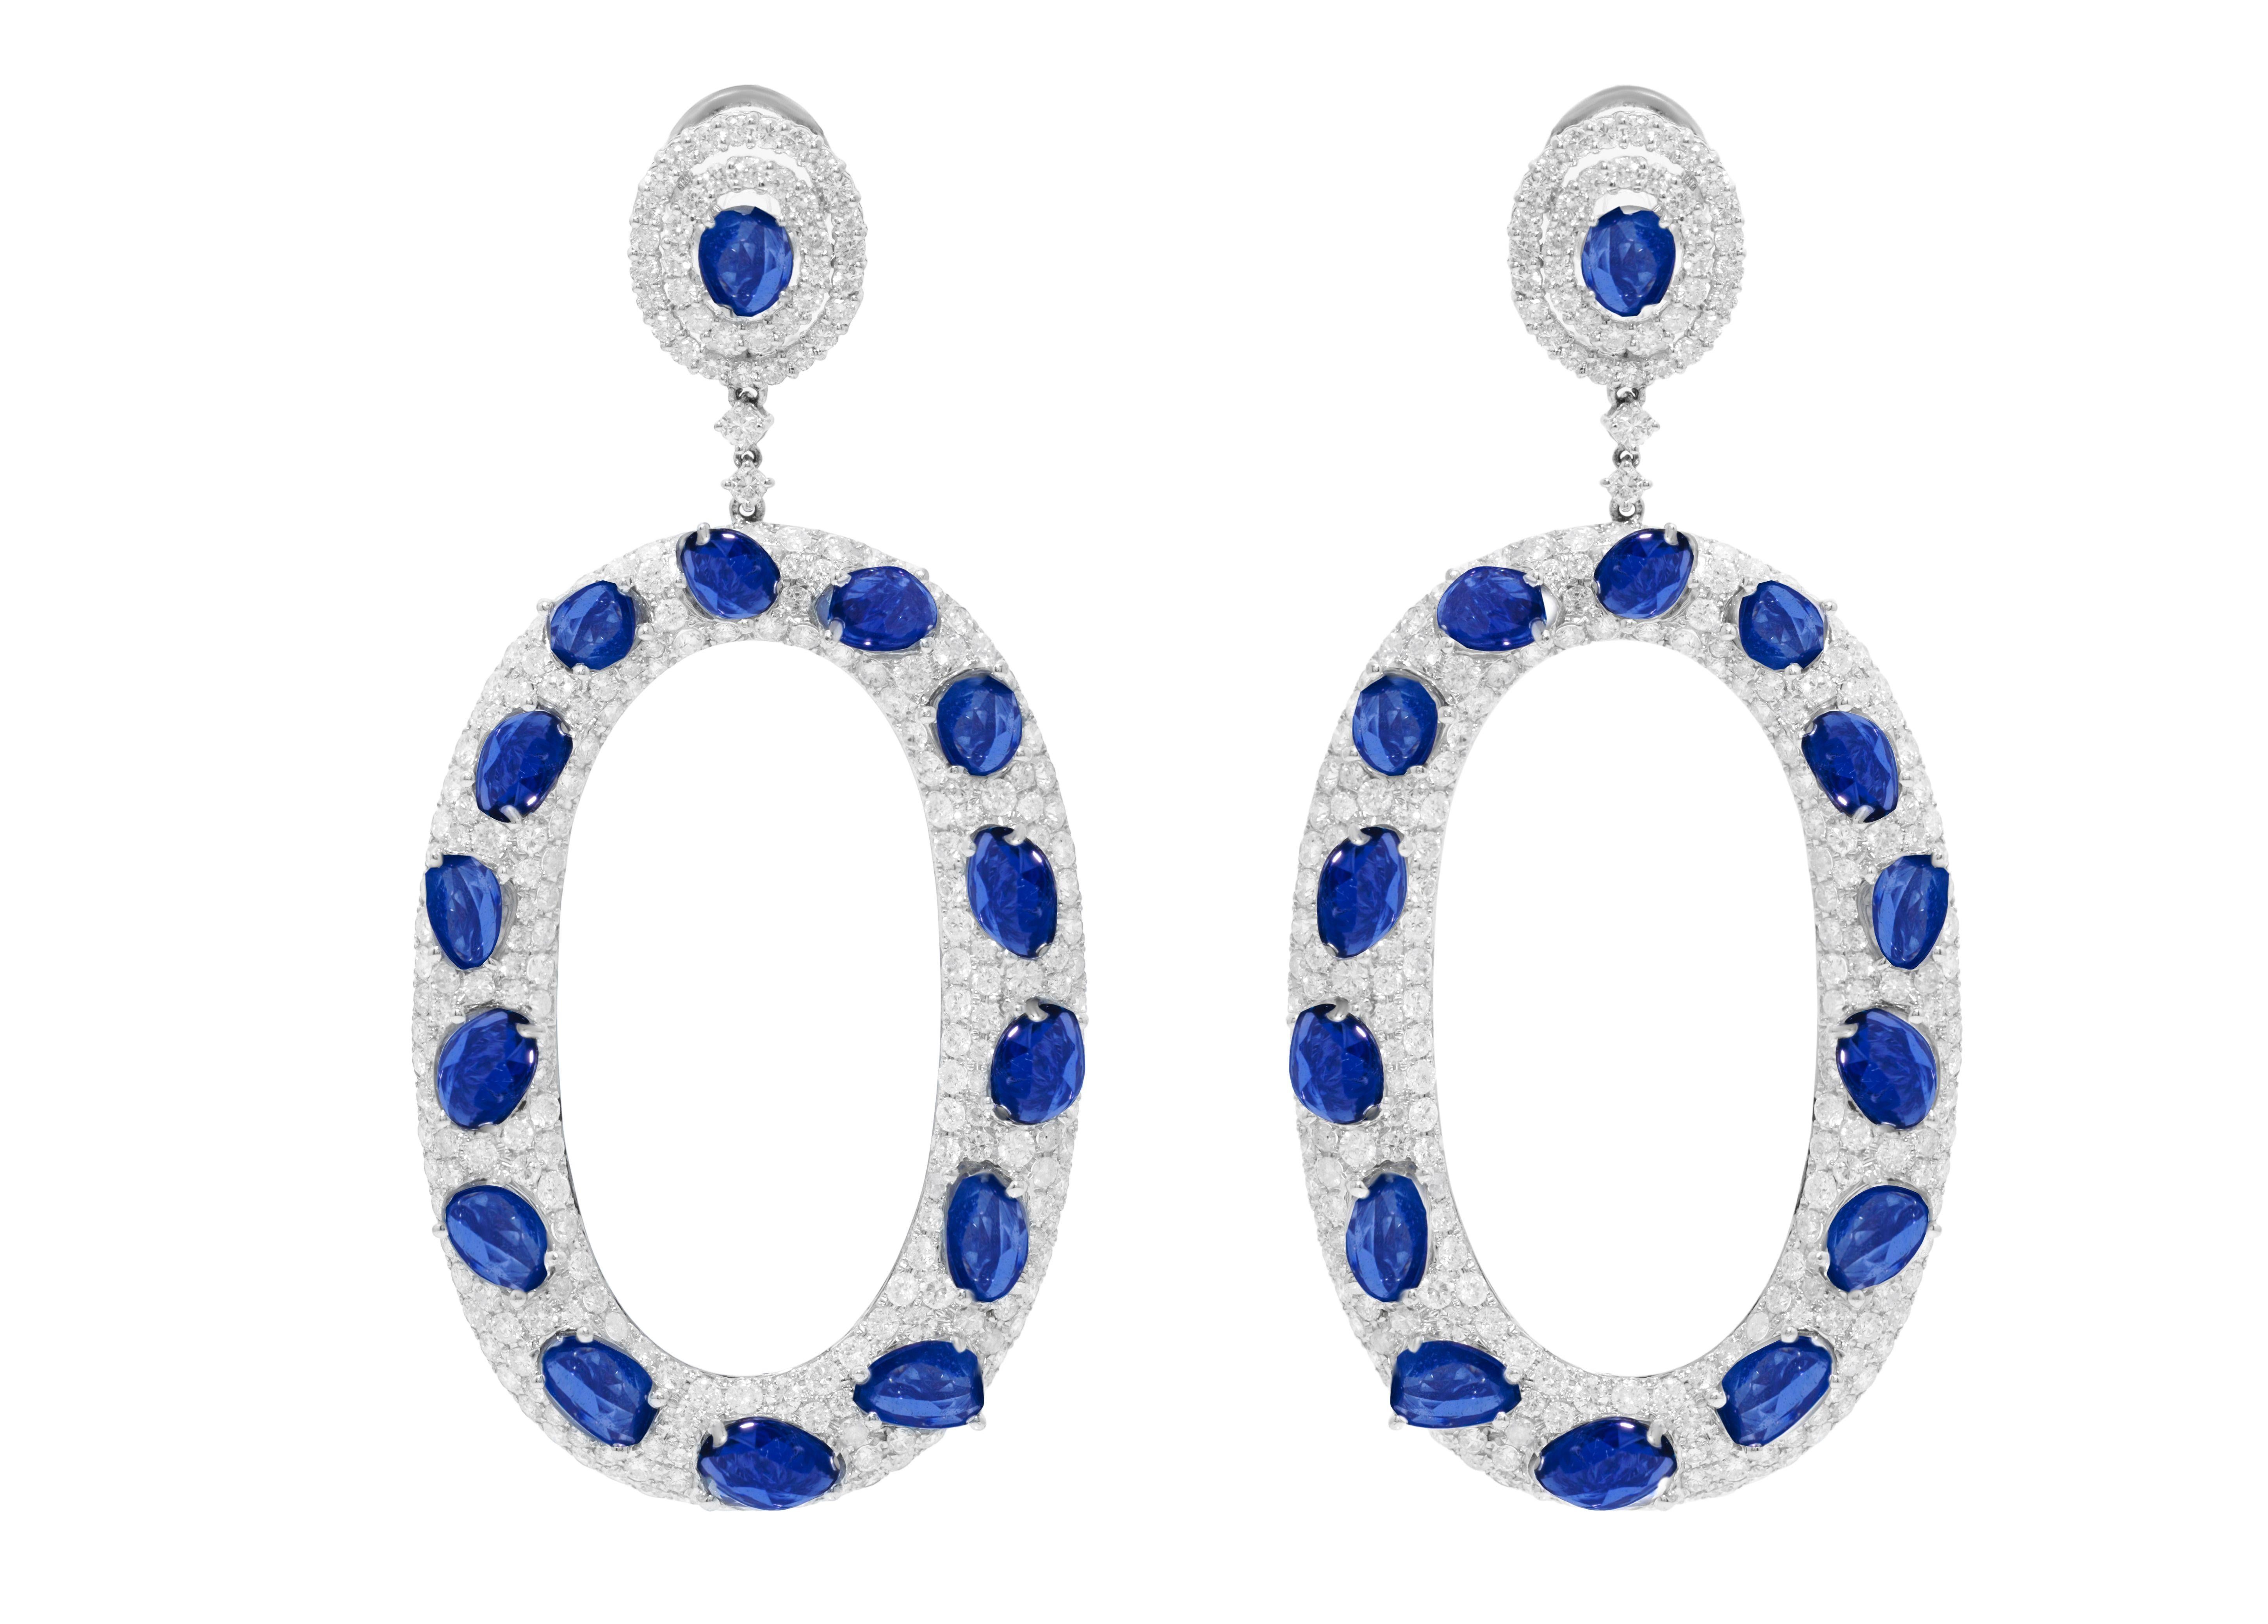 Diana M. 20.14 Carat Sapphire and Diamond Bagel Fashion Earrings  In New Condition For Sale In New York, NY